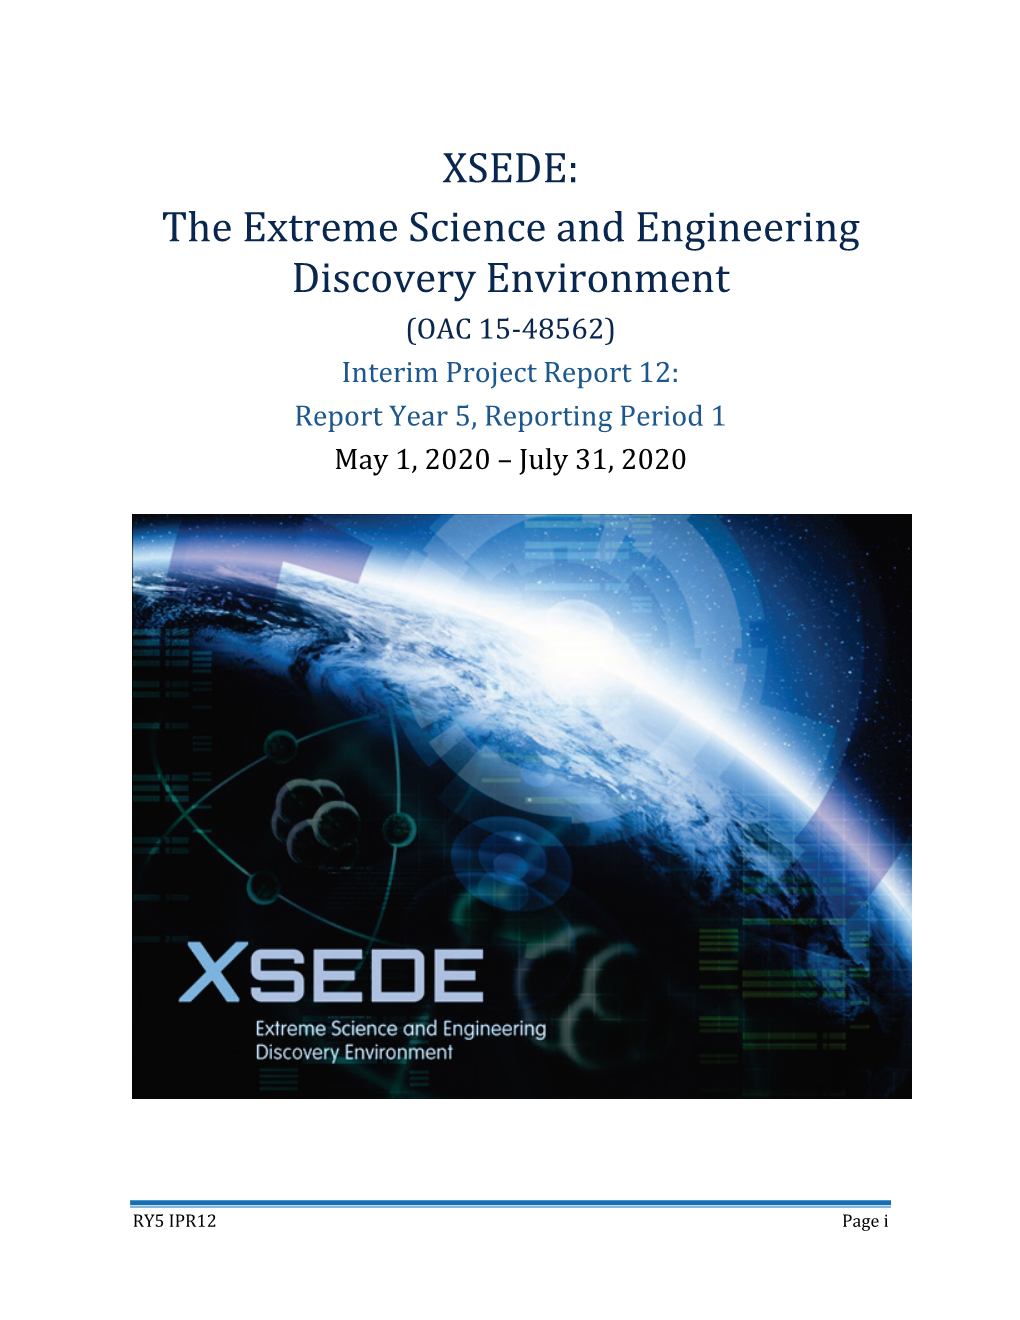 XSEDE: the Extreme Science and Engineering Discovery Environment